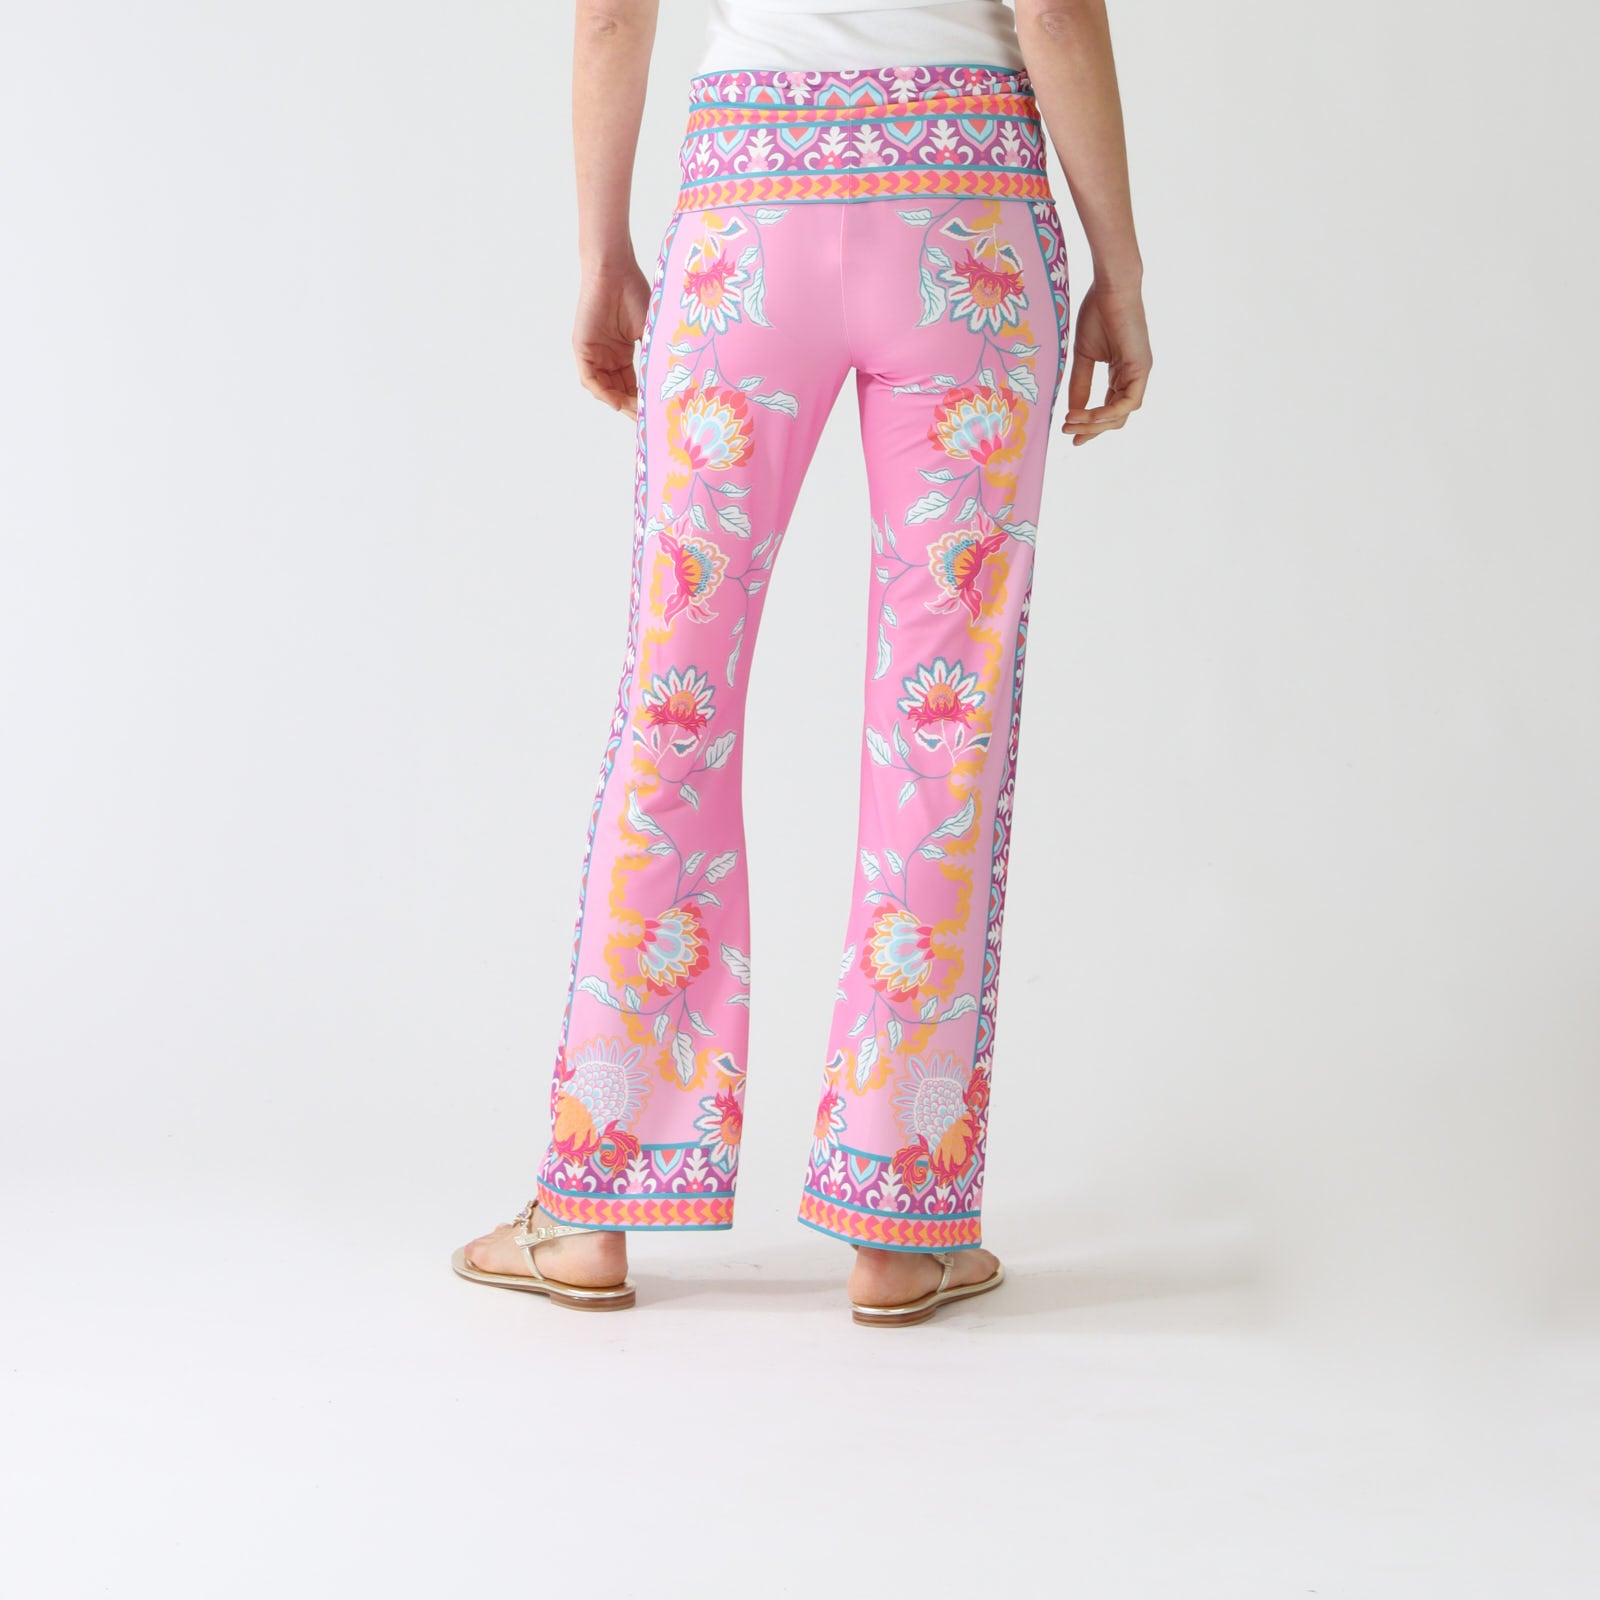 Madelyn Pink Printed Jersey Foldover Pants